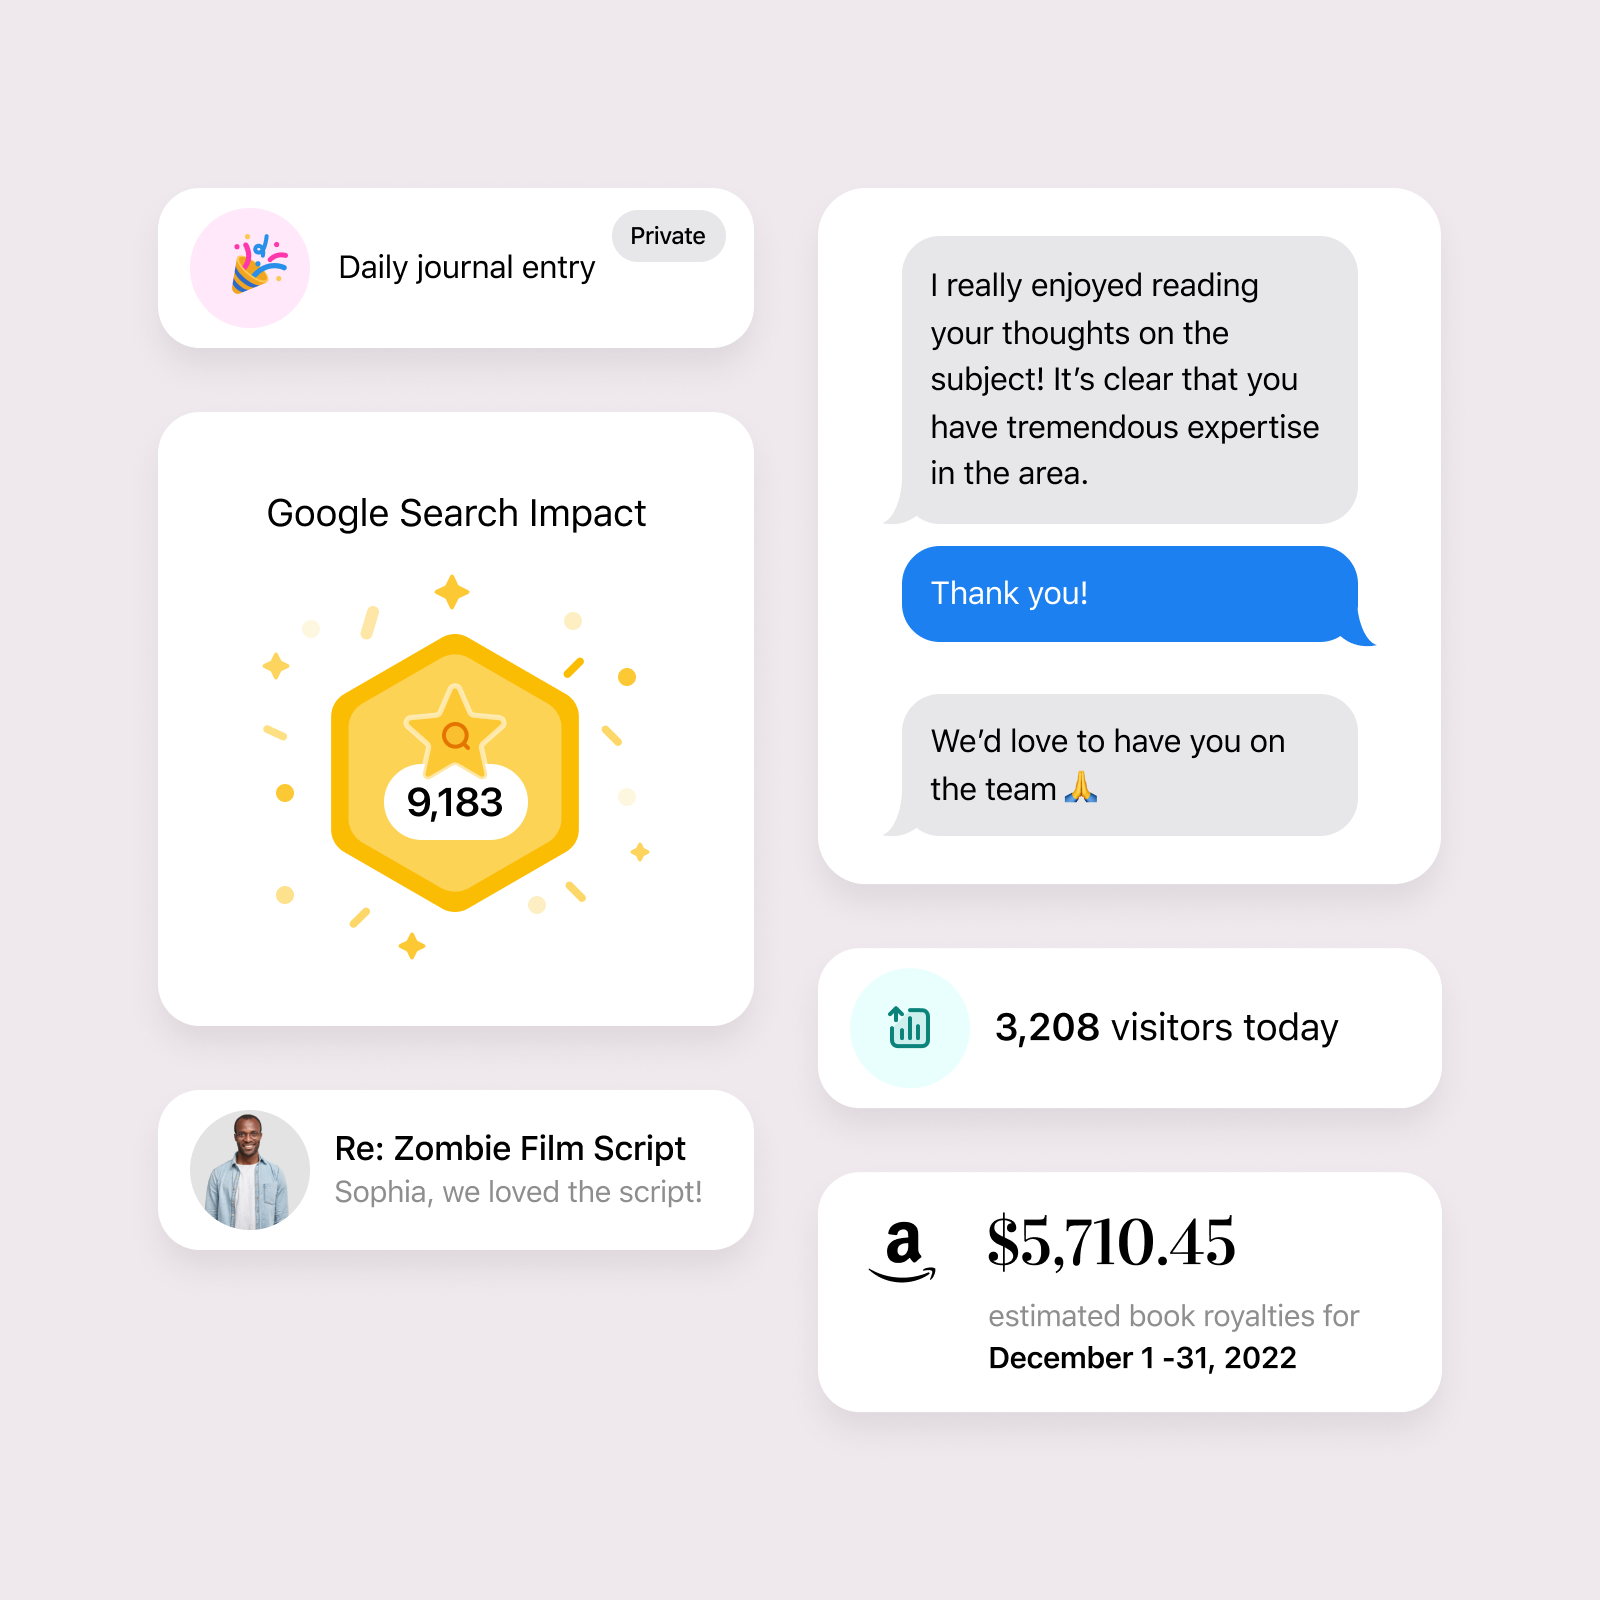 a mockup of various achievements unlocked with building a writing habit - getting a job, visitors to a website, book sales dashboard, acceptance of a movie script, google search impact score rising, daily journal entry added